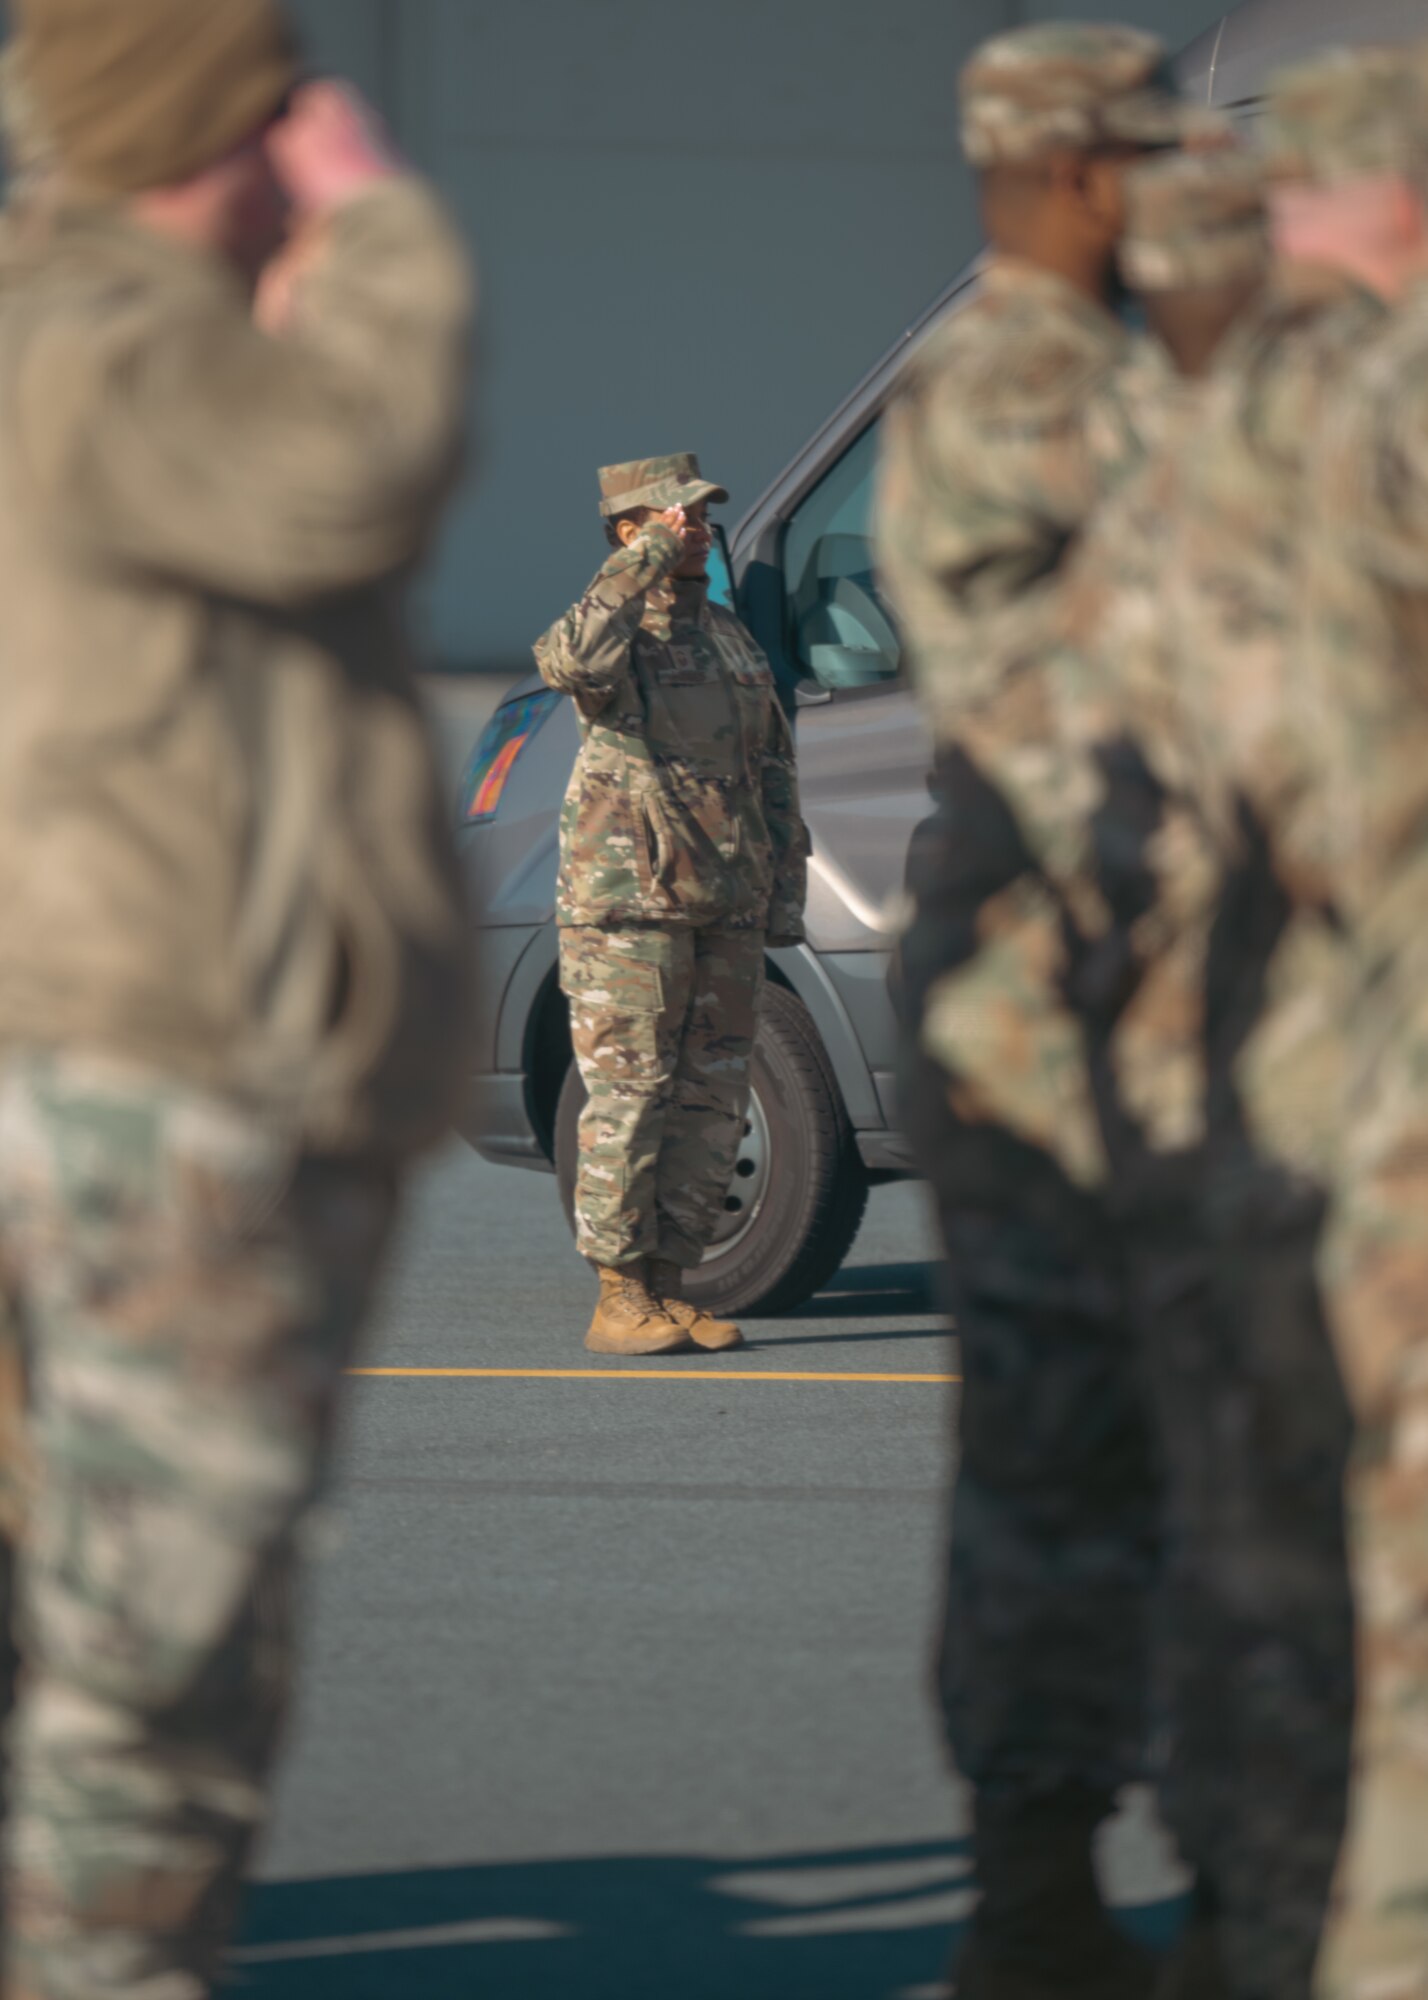 A female service member salutes during a dignified transfer ground training.